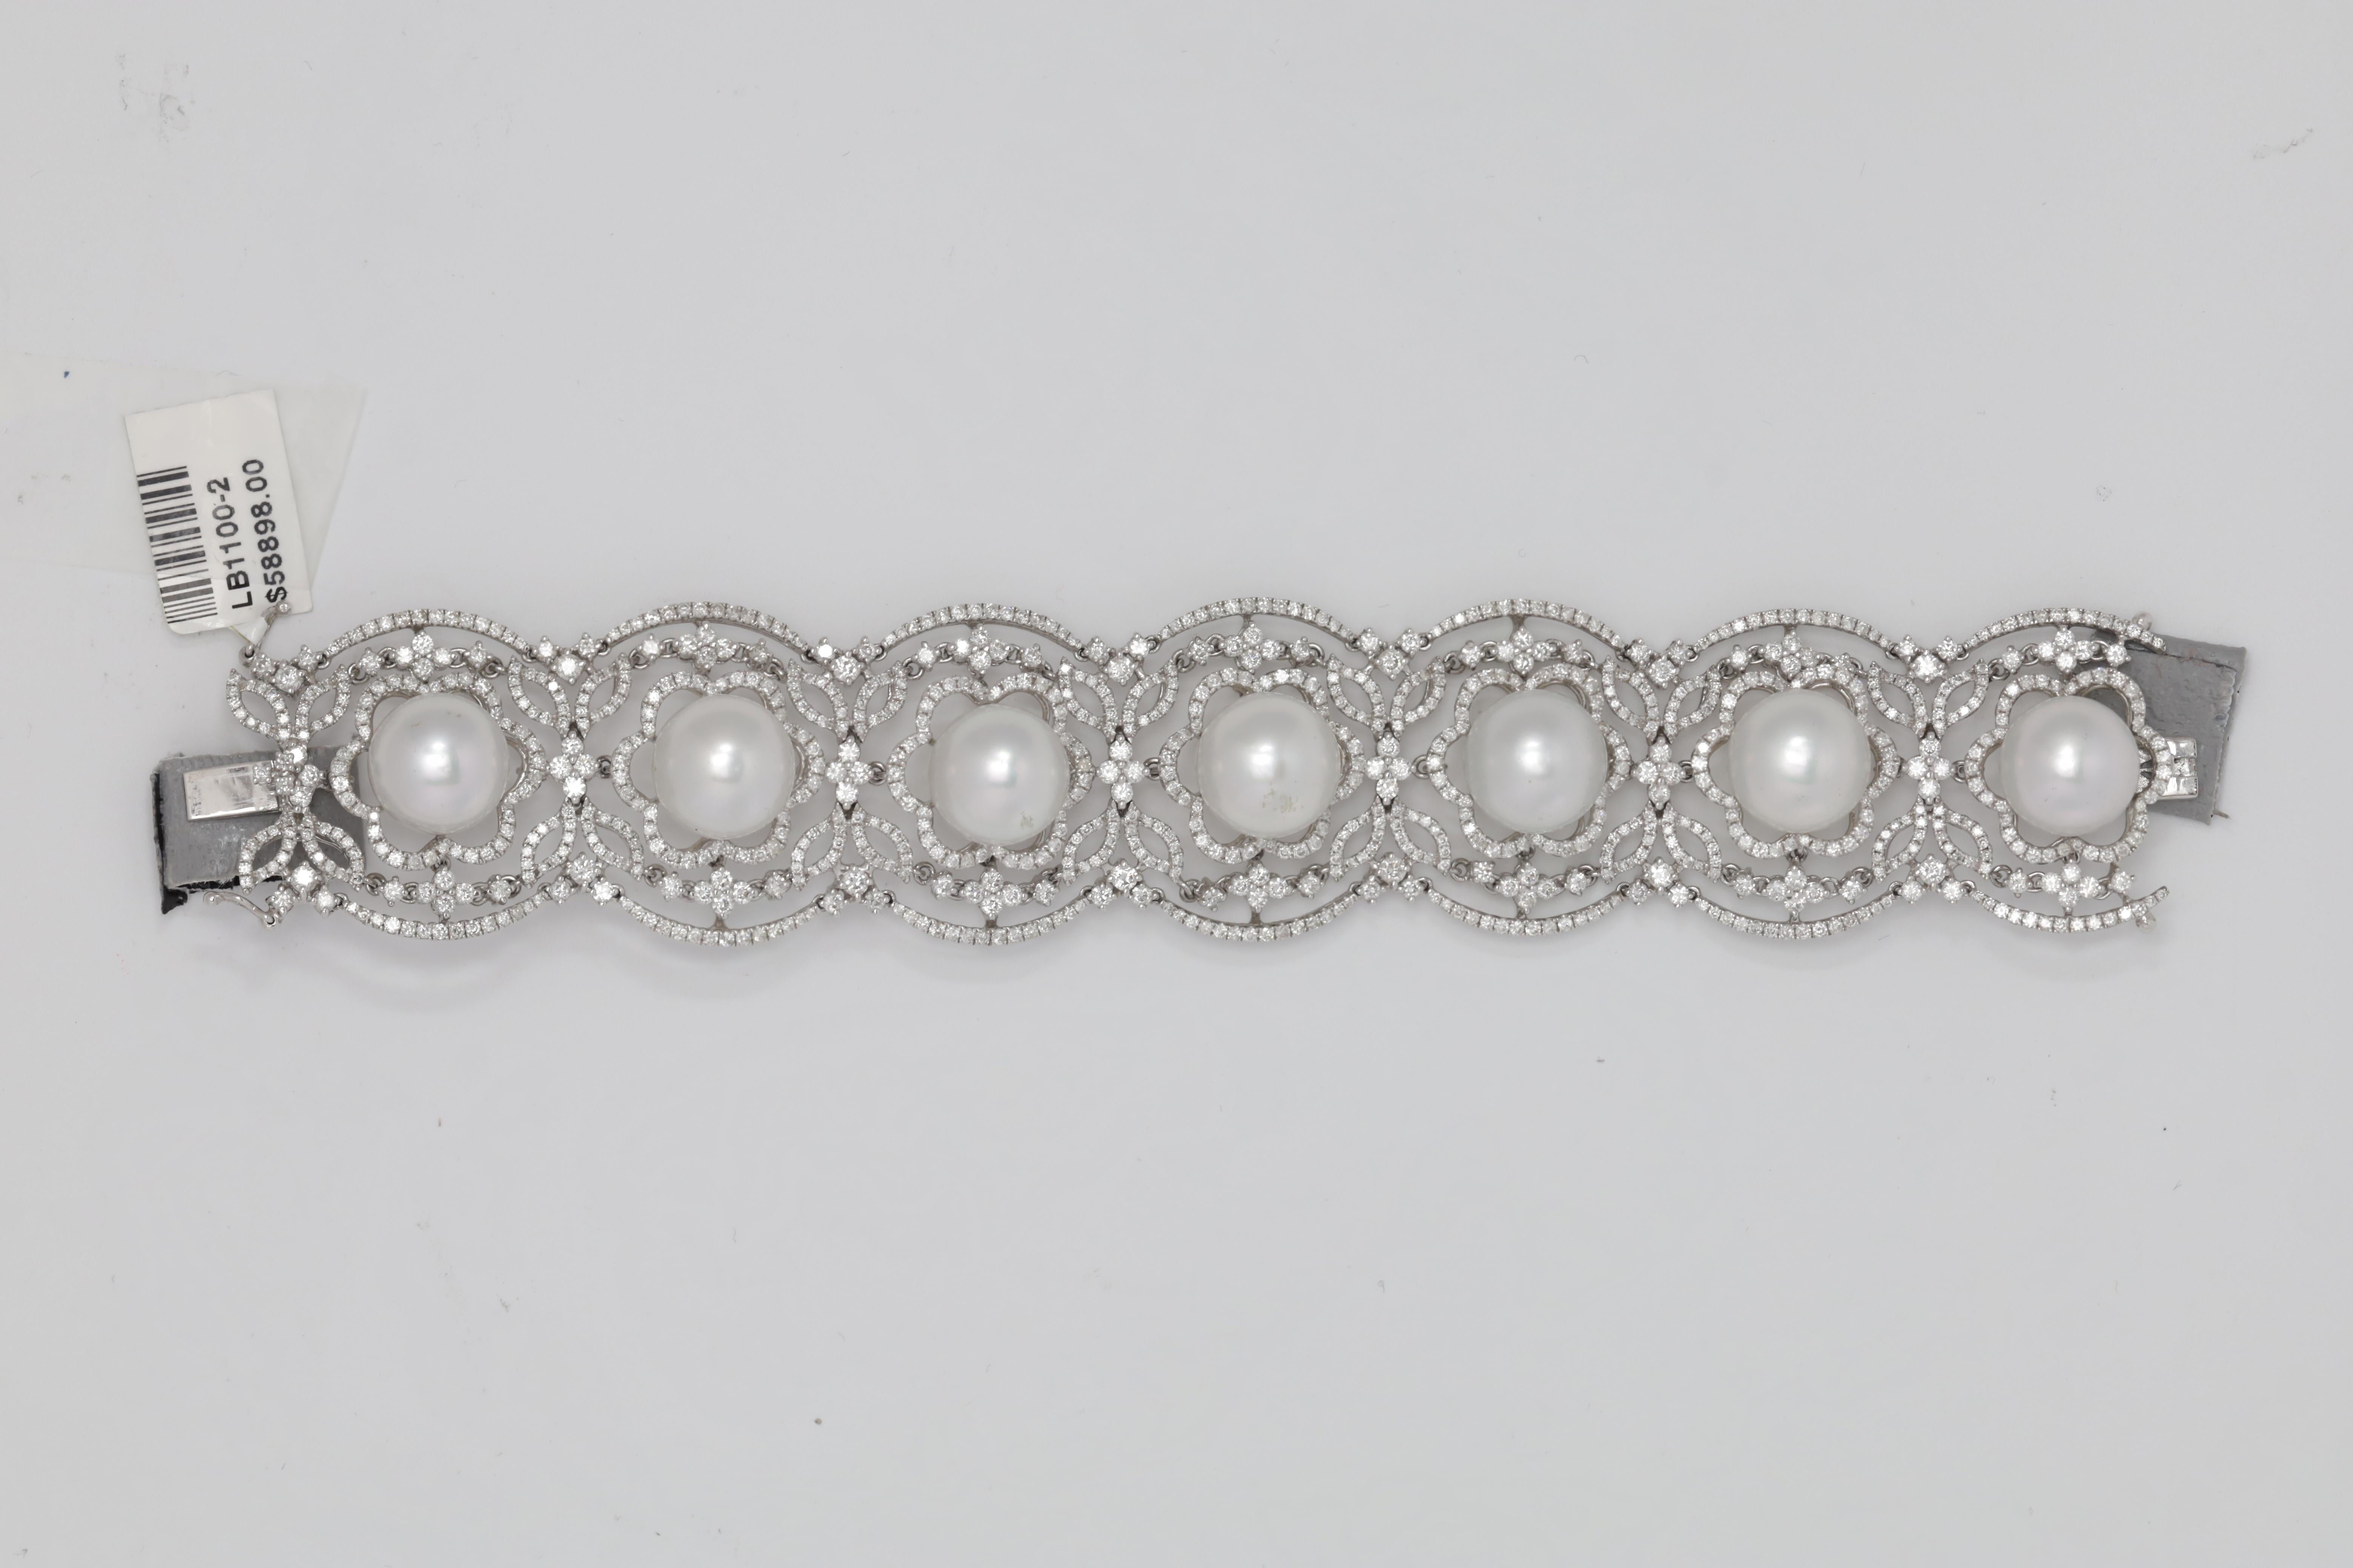 18 kt white gold diamond and pearl fashion bracelet adorned with 13.5 mm Tahitian pearls surrounded by a flower design with 12.88 cts tw of diamonds.
Diana M. is a leading supplier of top-quality fine jewelry for over 35 years.
Diana M is one-stop